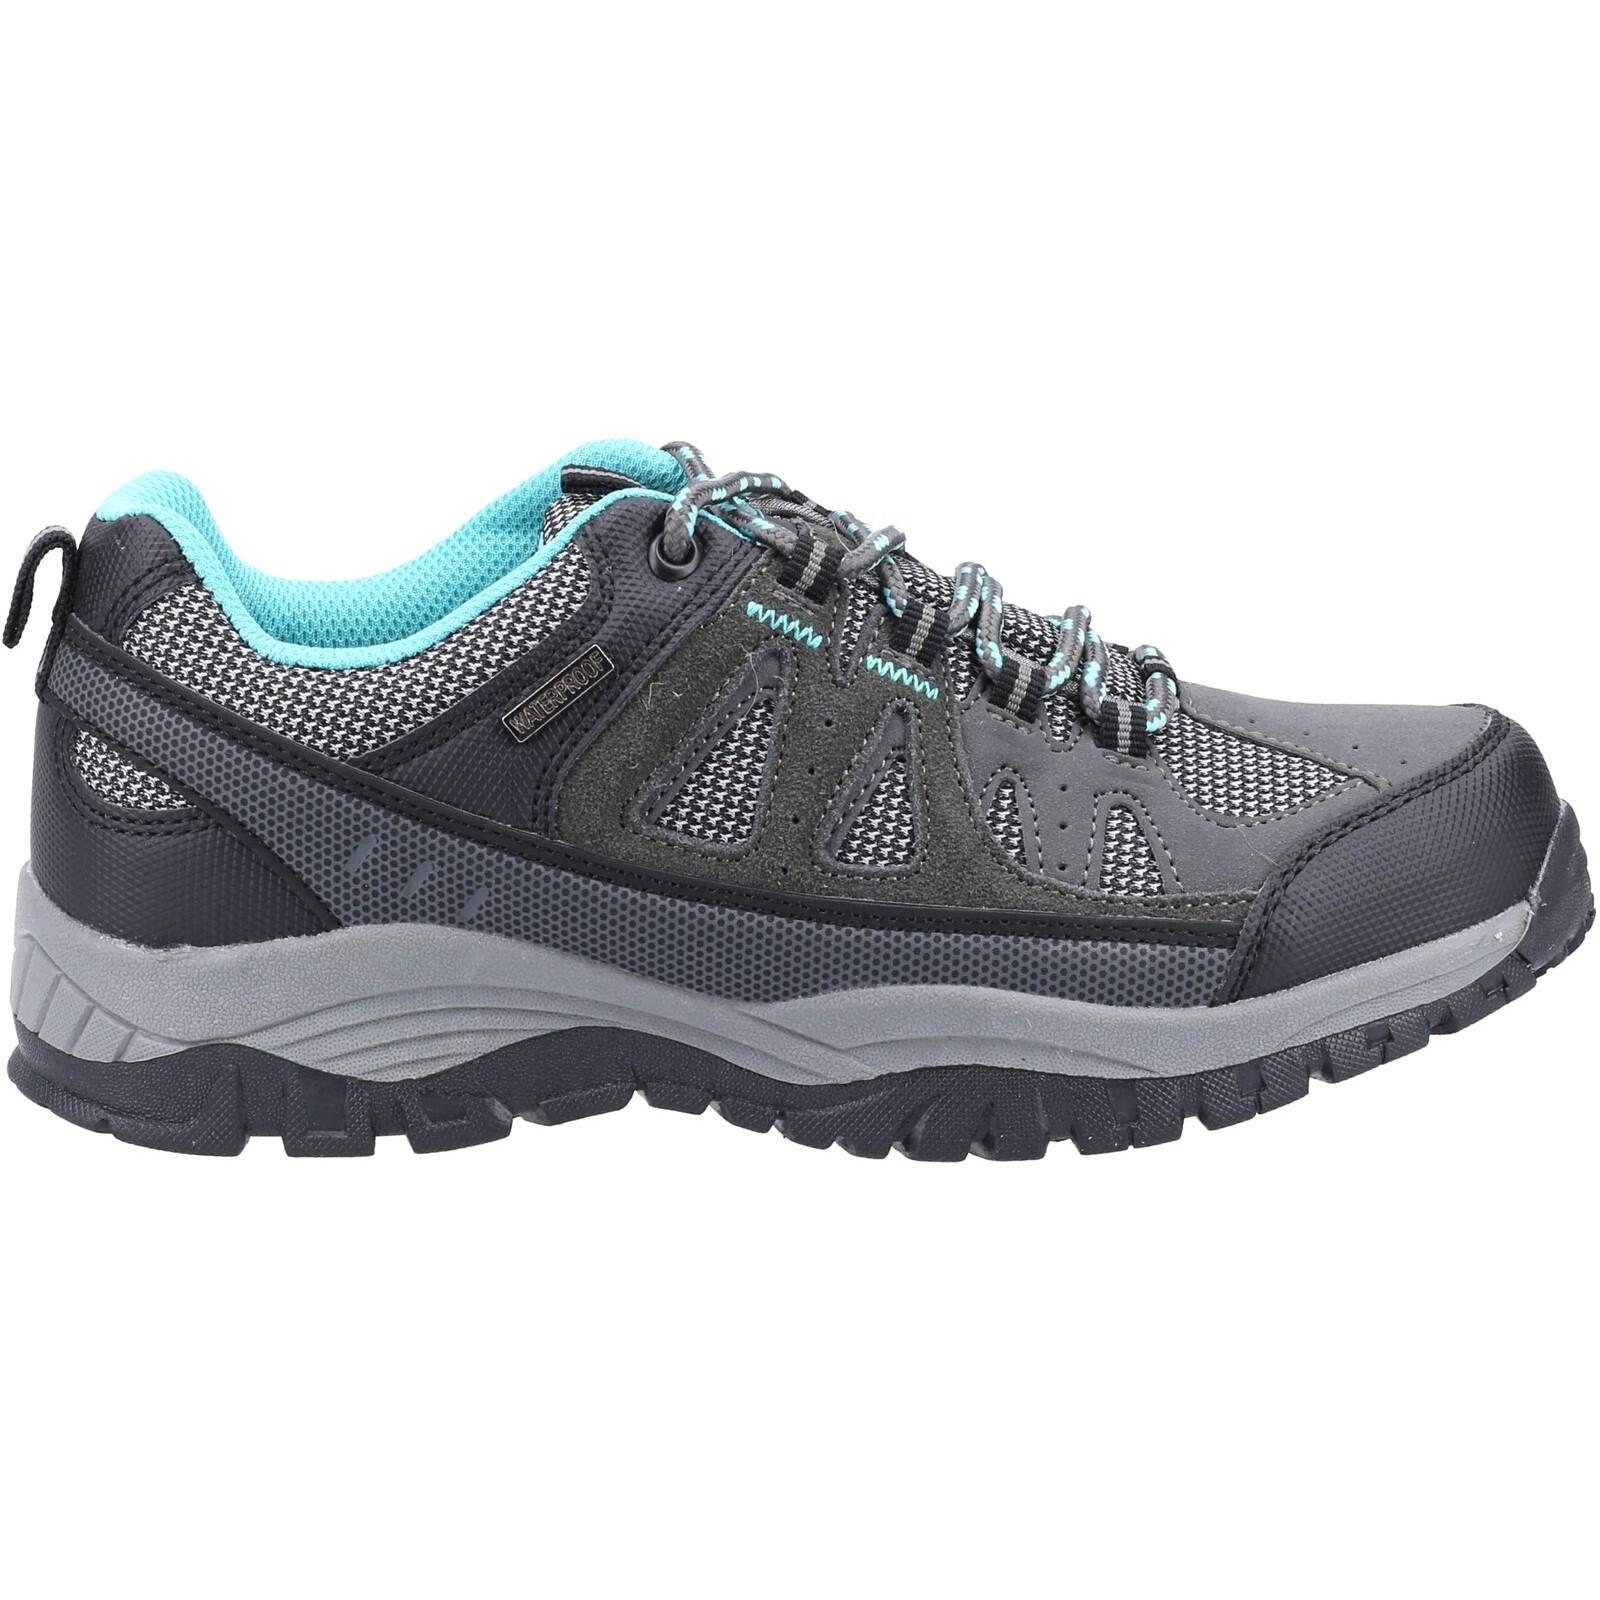 COTSWOLD Maisemore Low Ladies Hiking Shoes (All) GREY